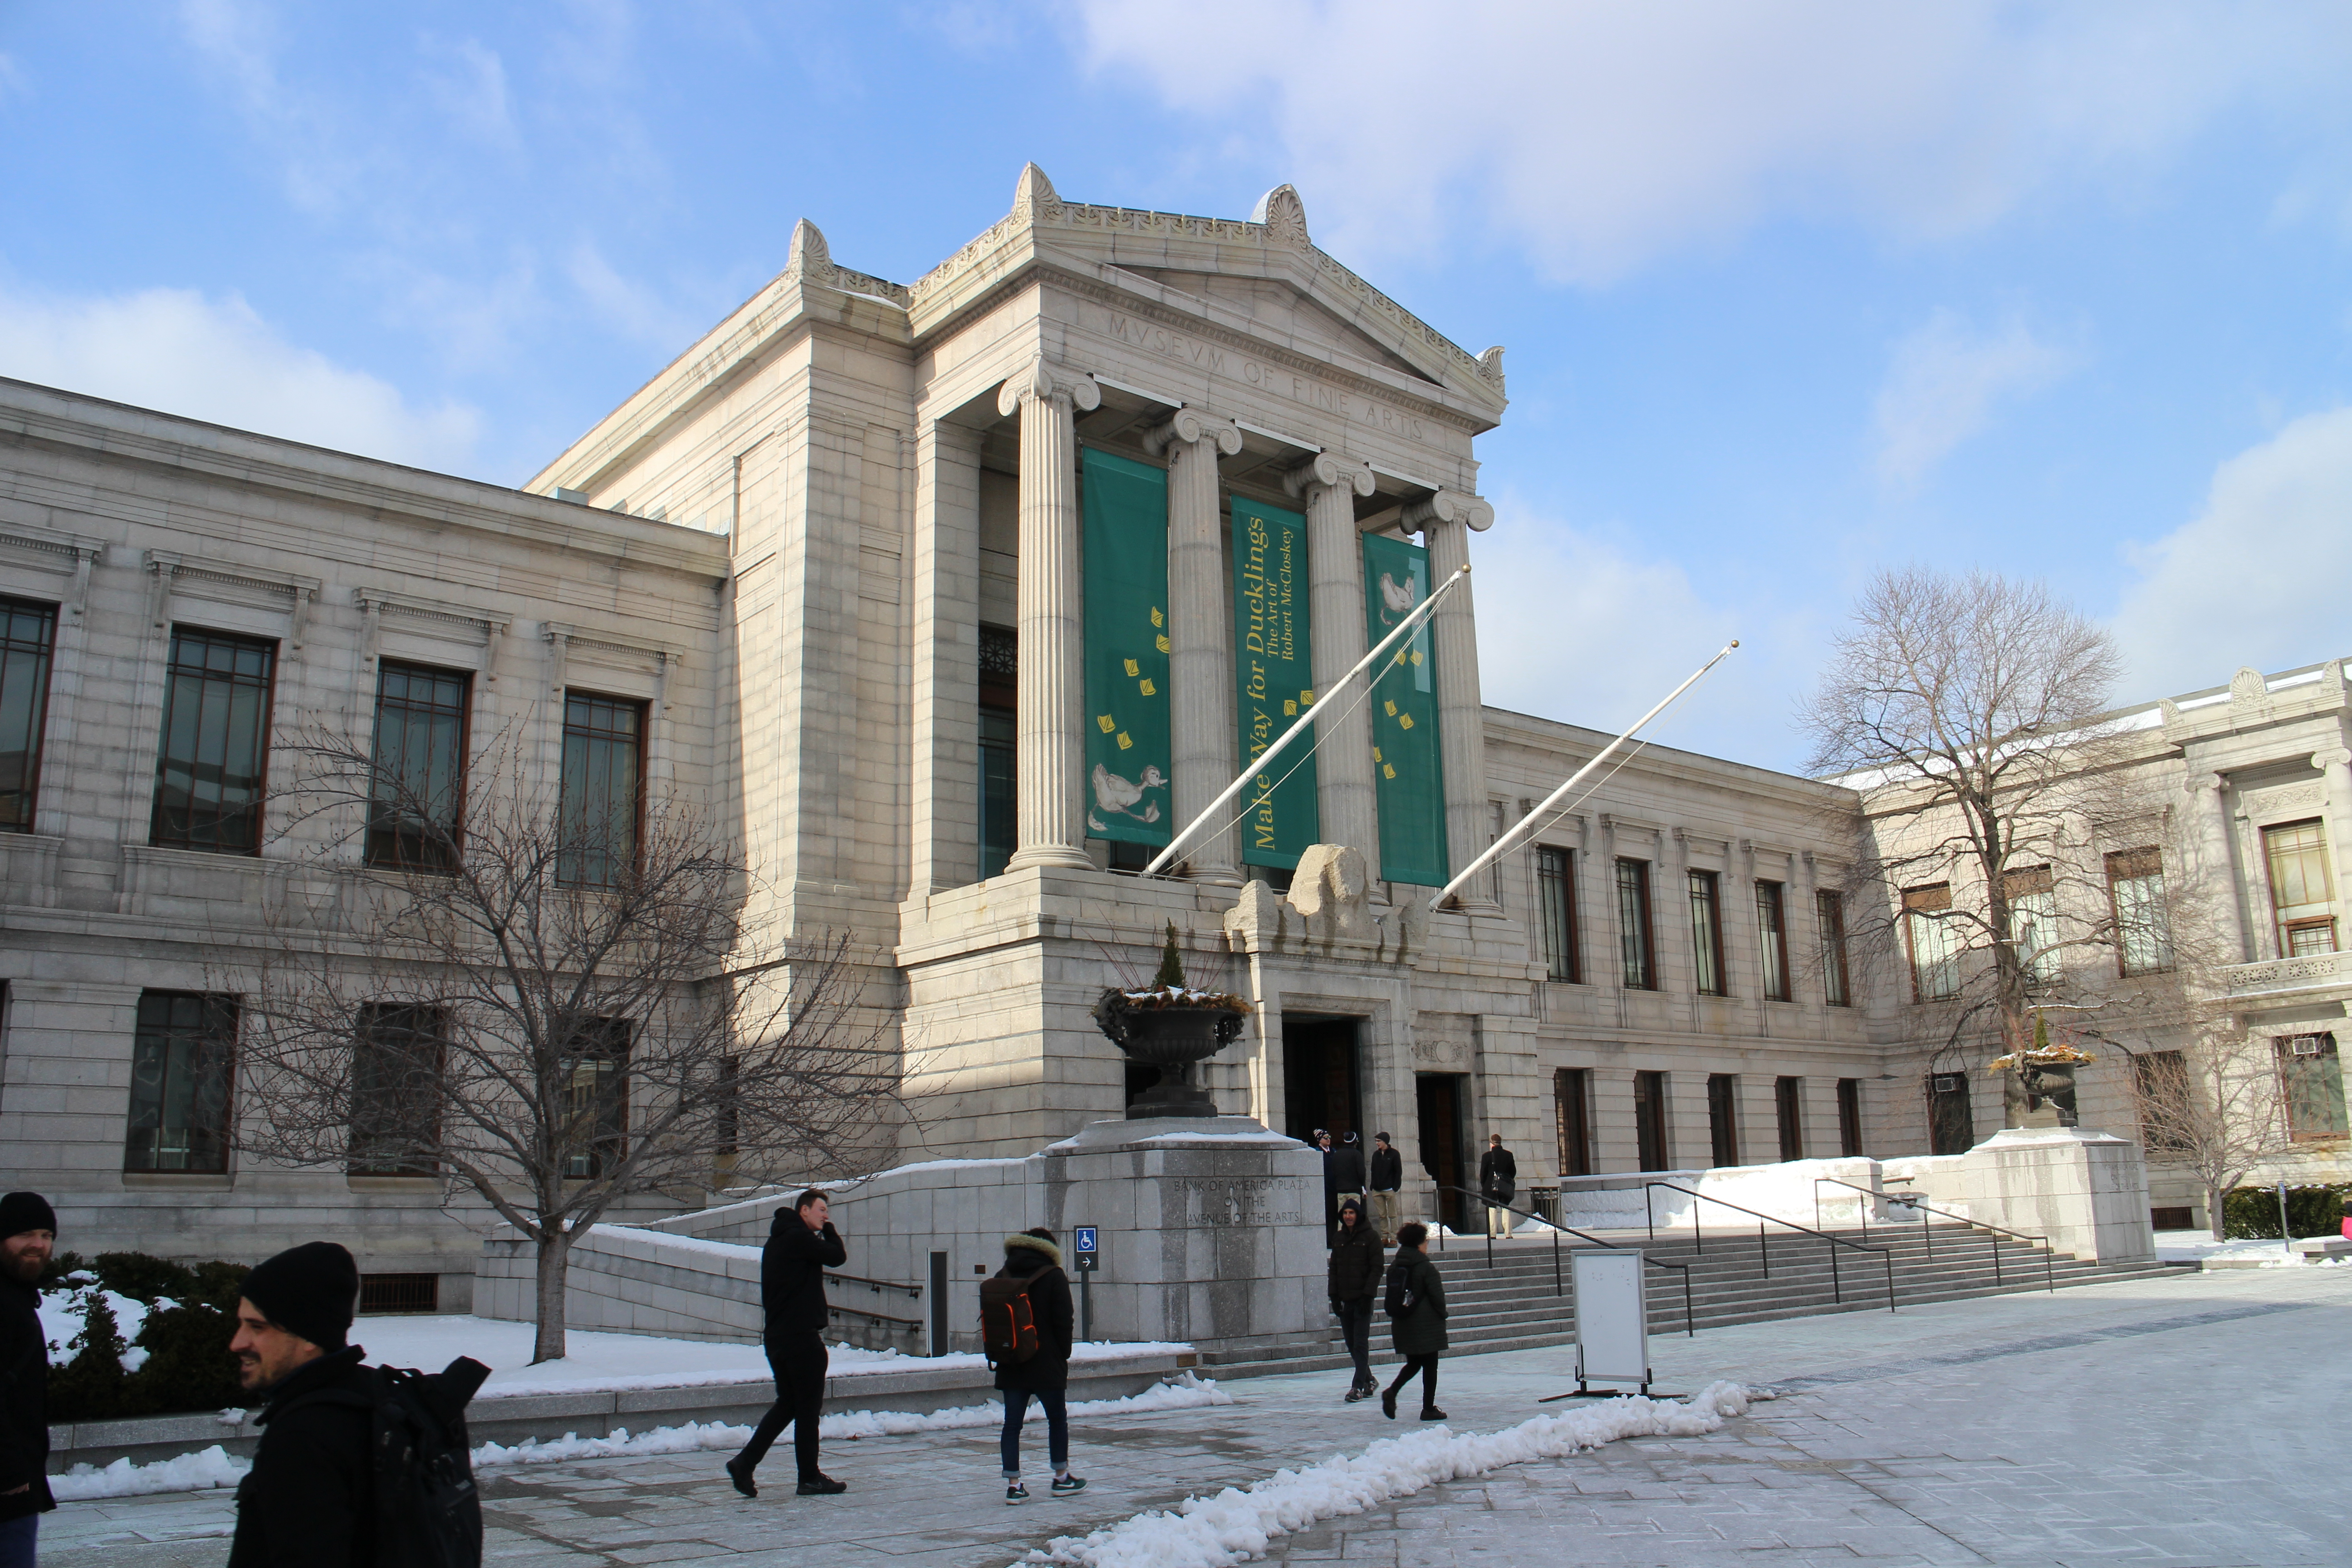 Exterior of the Boston Museum of Fine Arts, photographed in March 2017. On June 28, workers at the museum finalized their first labor deal, following a vote to join a union in November 2020. Image courtesy of Wikimedia Commons, photo credit Suicasmo. Shared under the Creative Commons Attribution-Share Alike 4.0 International license.